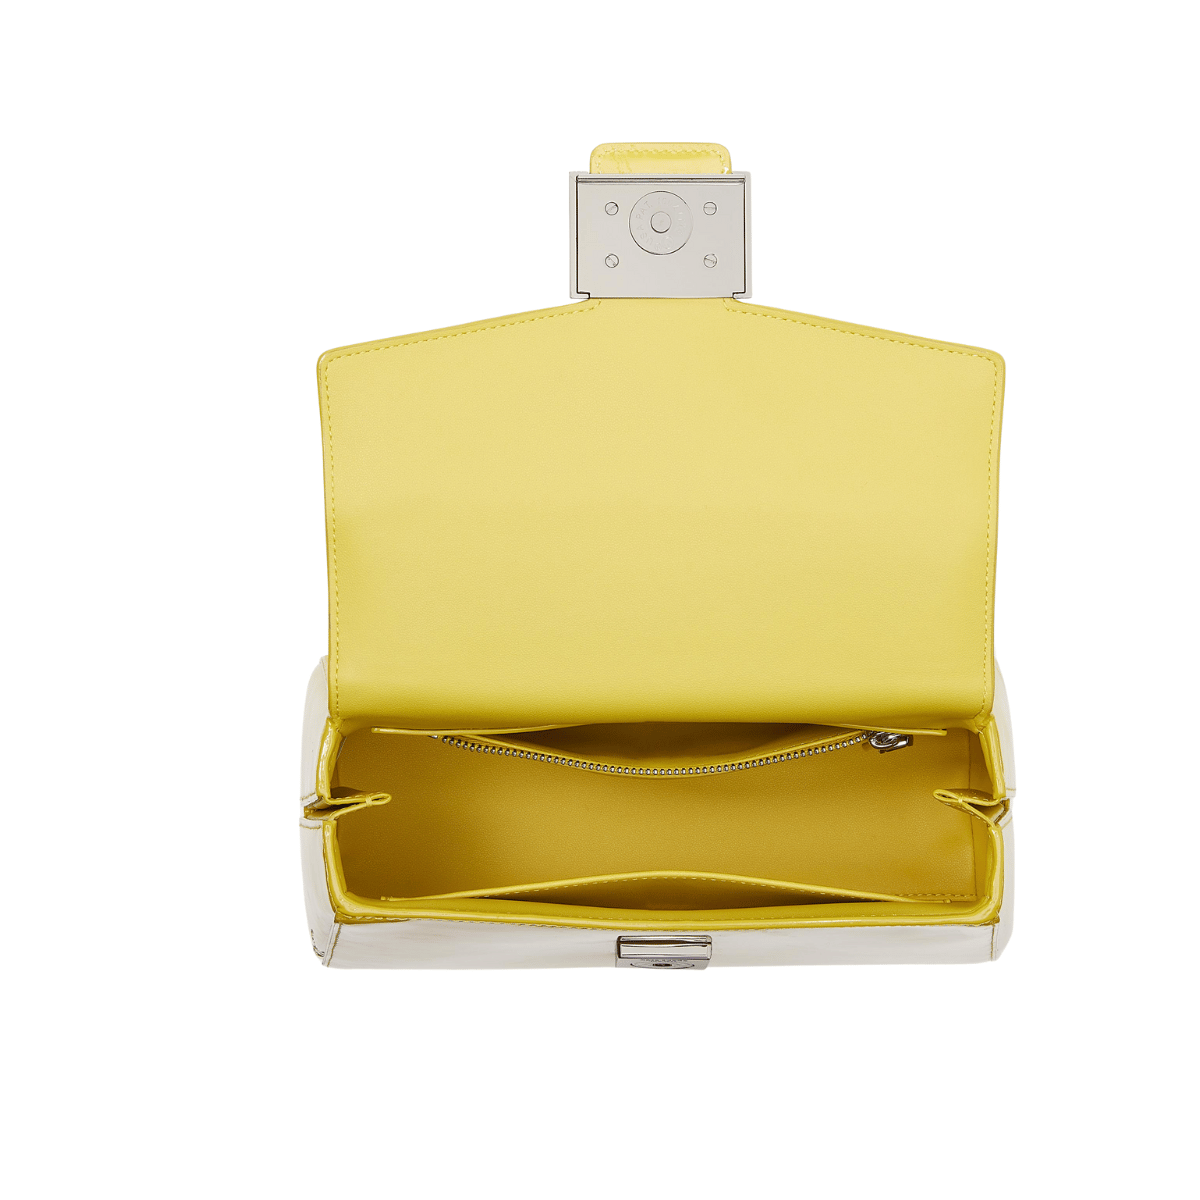 Katy Patent Leather Small Top Handle Bag